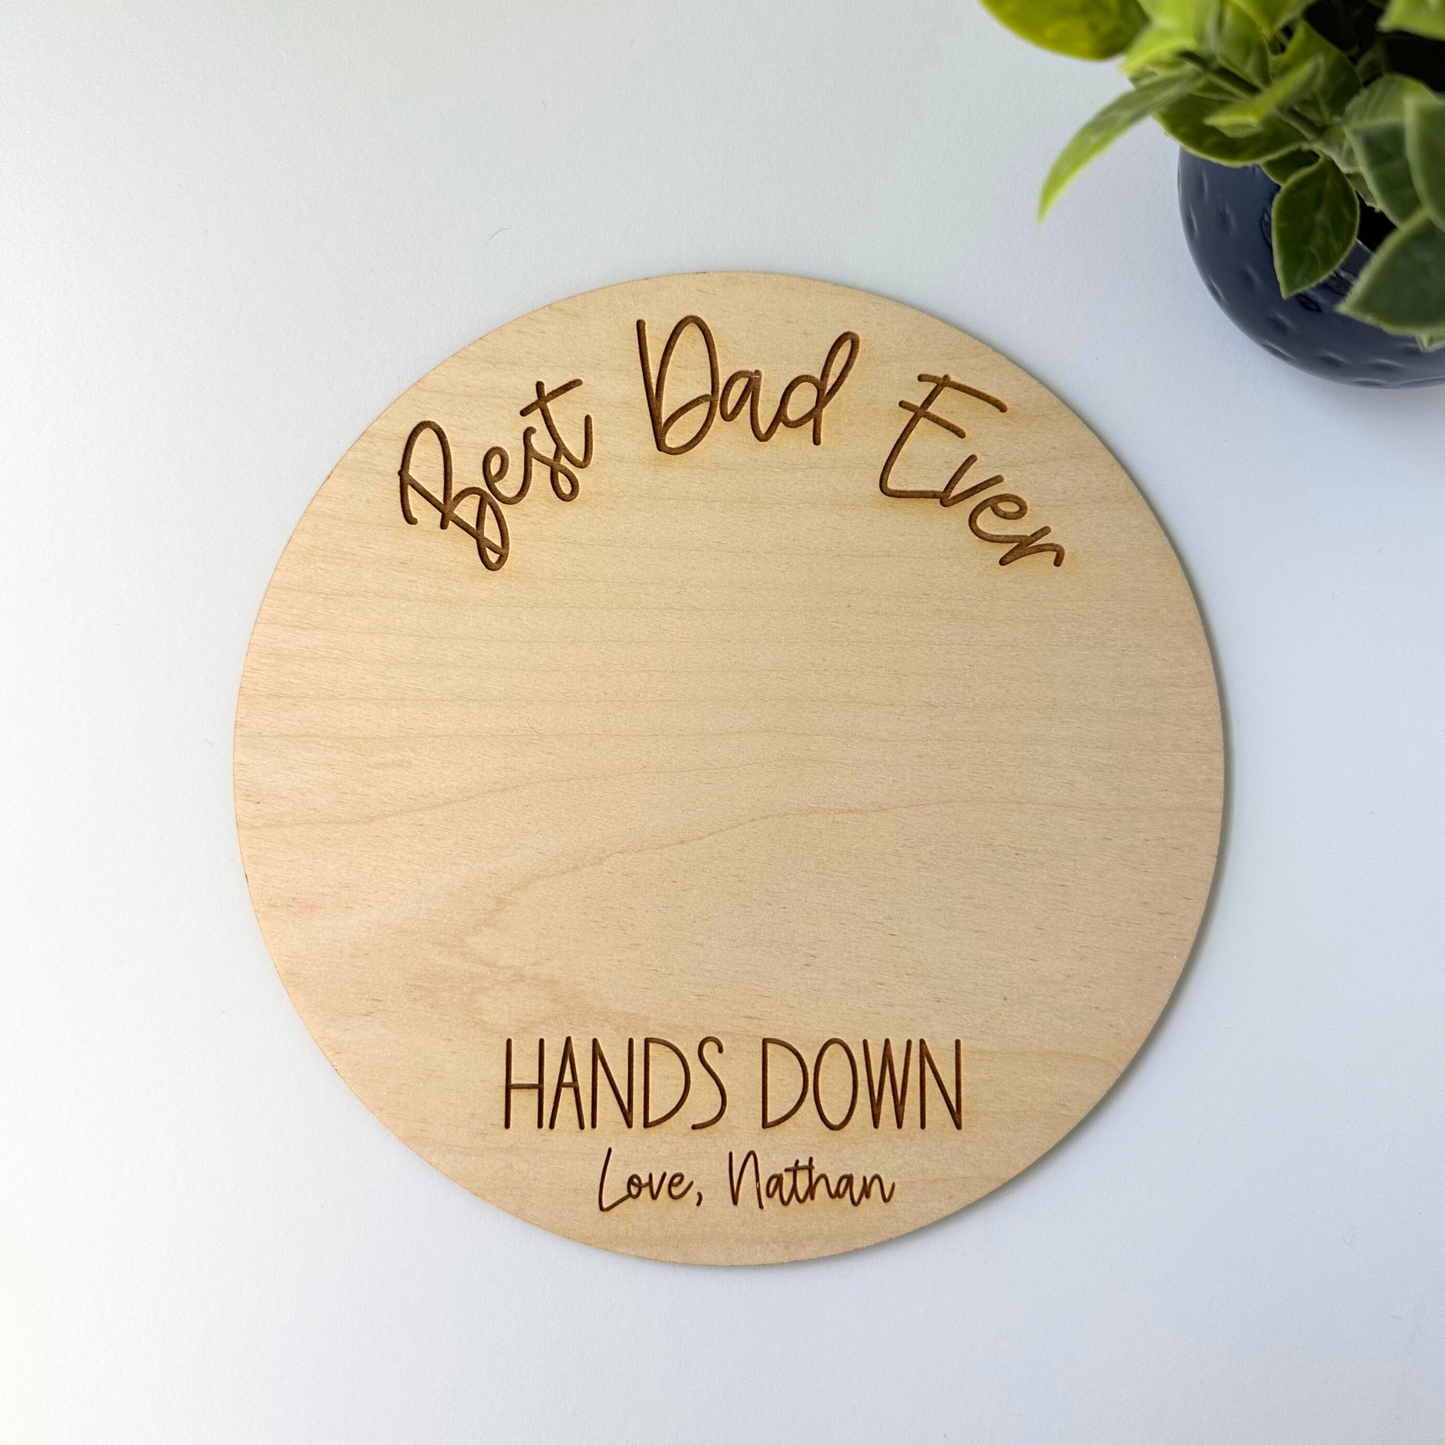 Best Mom Ever, Mother's Day Handprint Sign